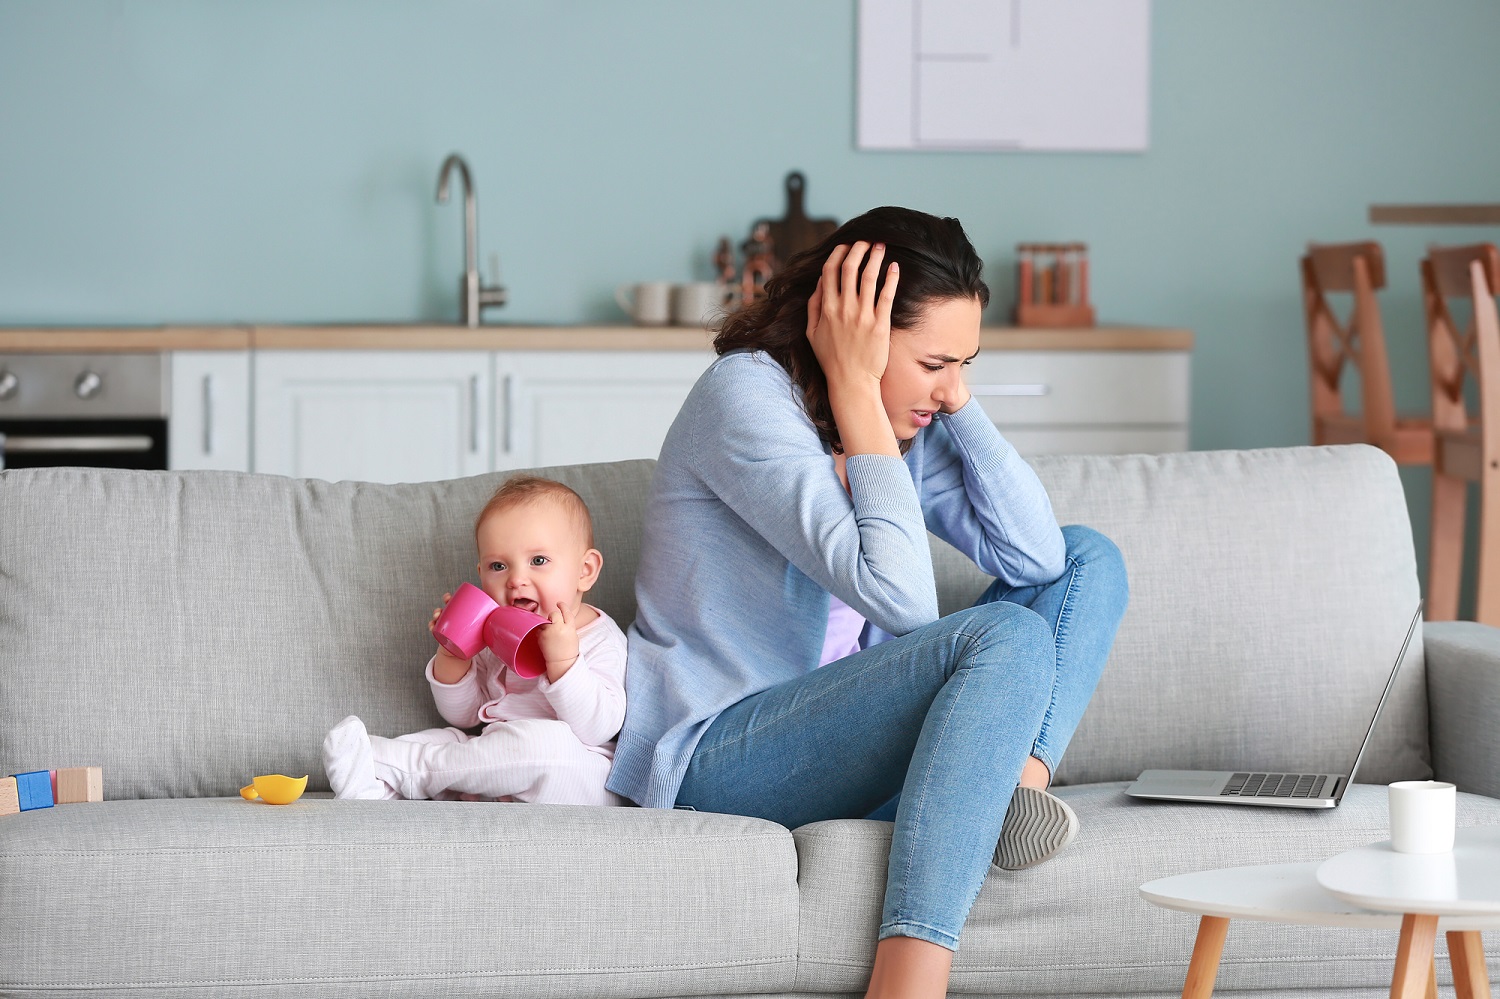 Difference Between the Baby Blues and Postpartum Depression